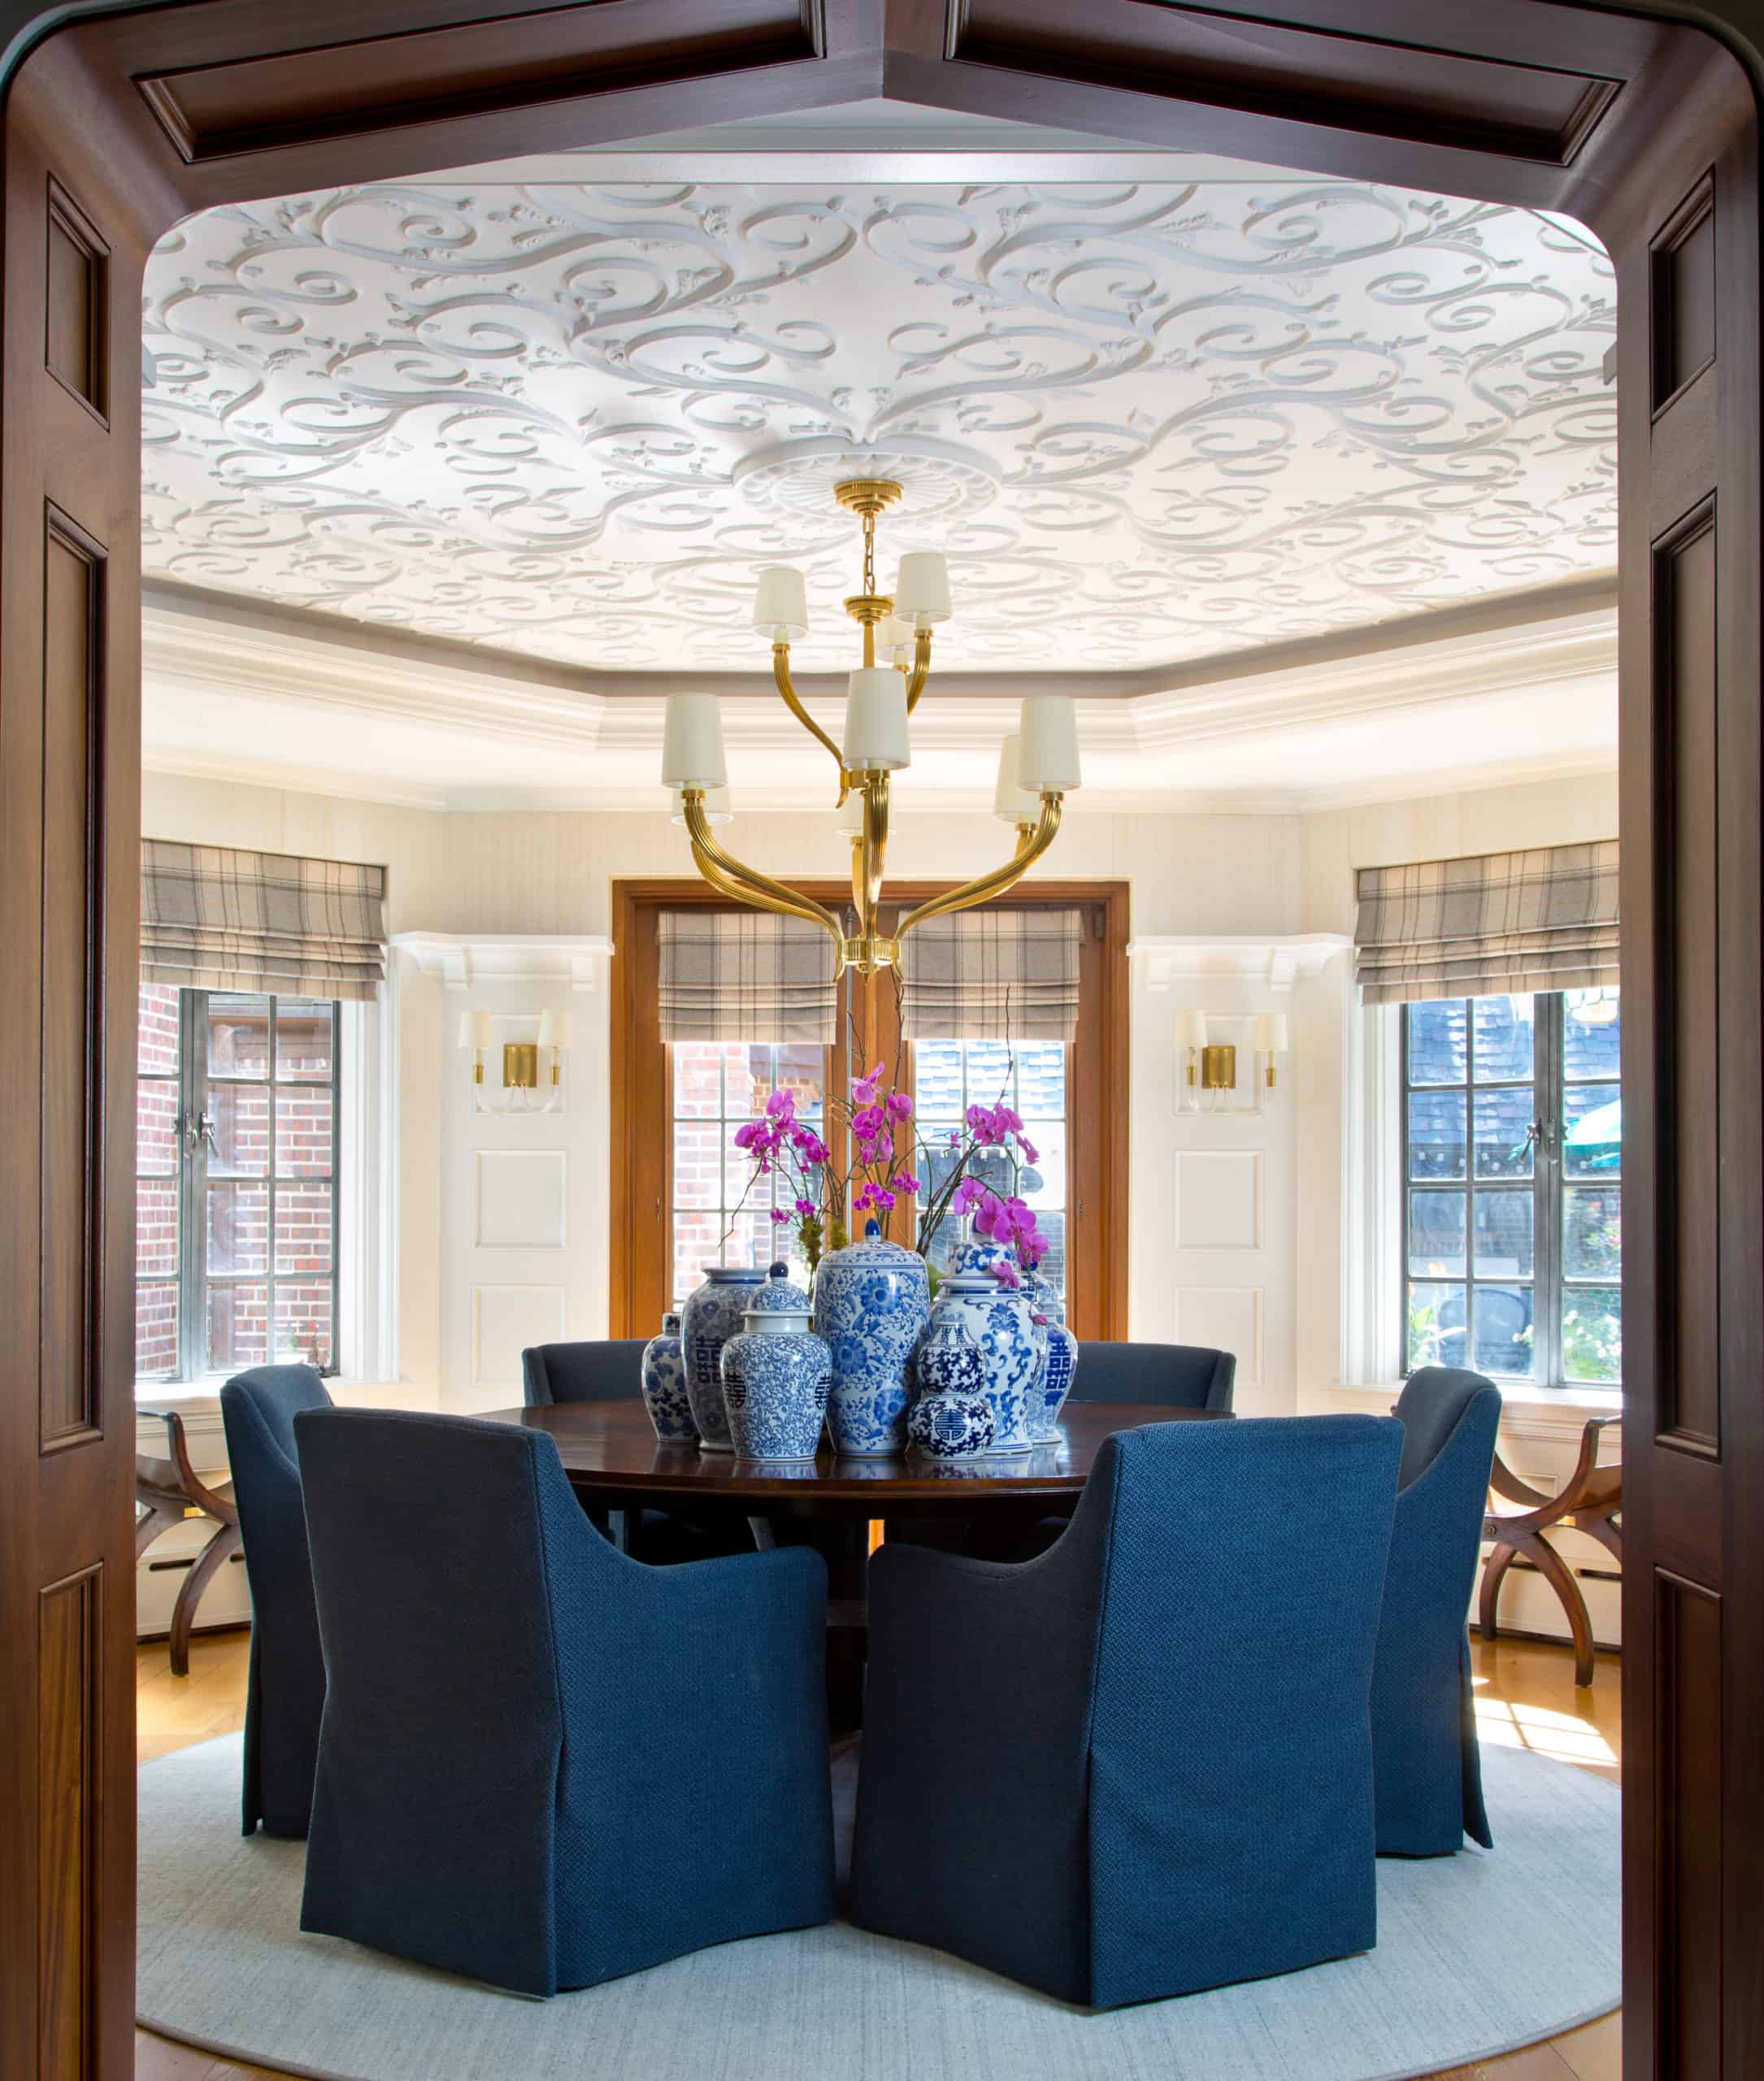 Mixing old and new decor in interior design with a gorgeous 2-tier dining room chandelier and reupholstered arm chairs